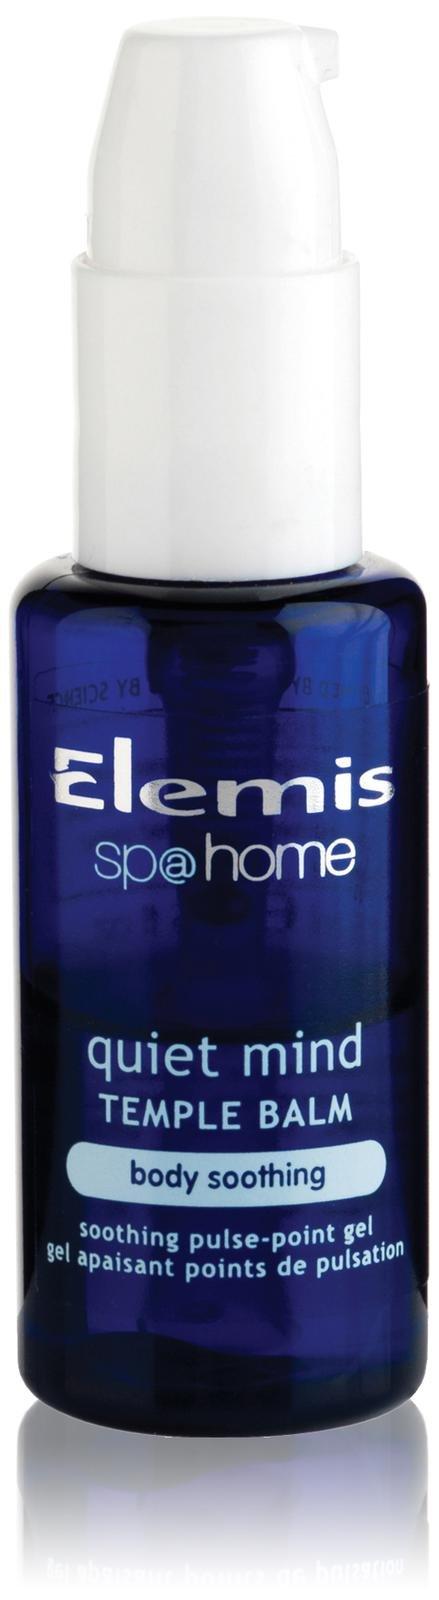 Elemis Sp@home Body Soothing Quiet Mind Temple Balm